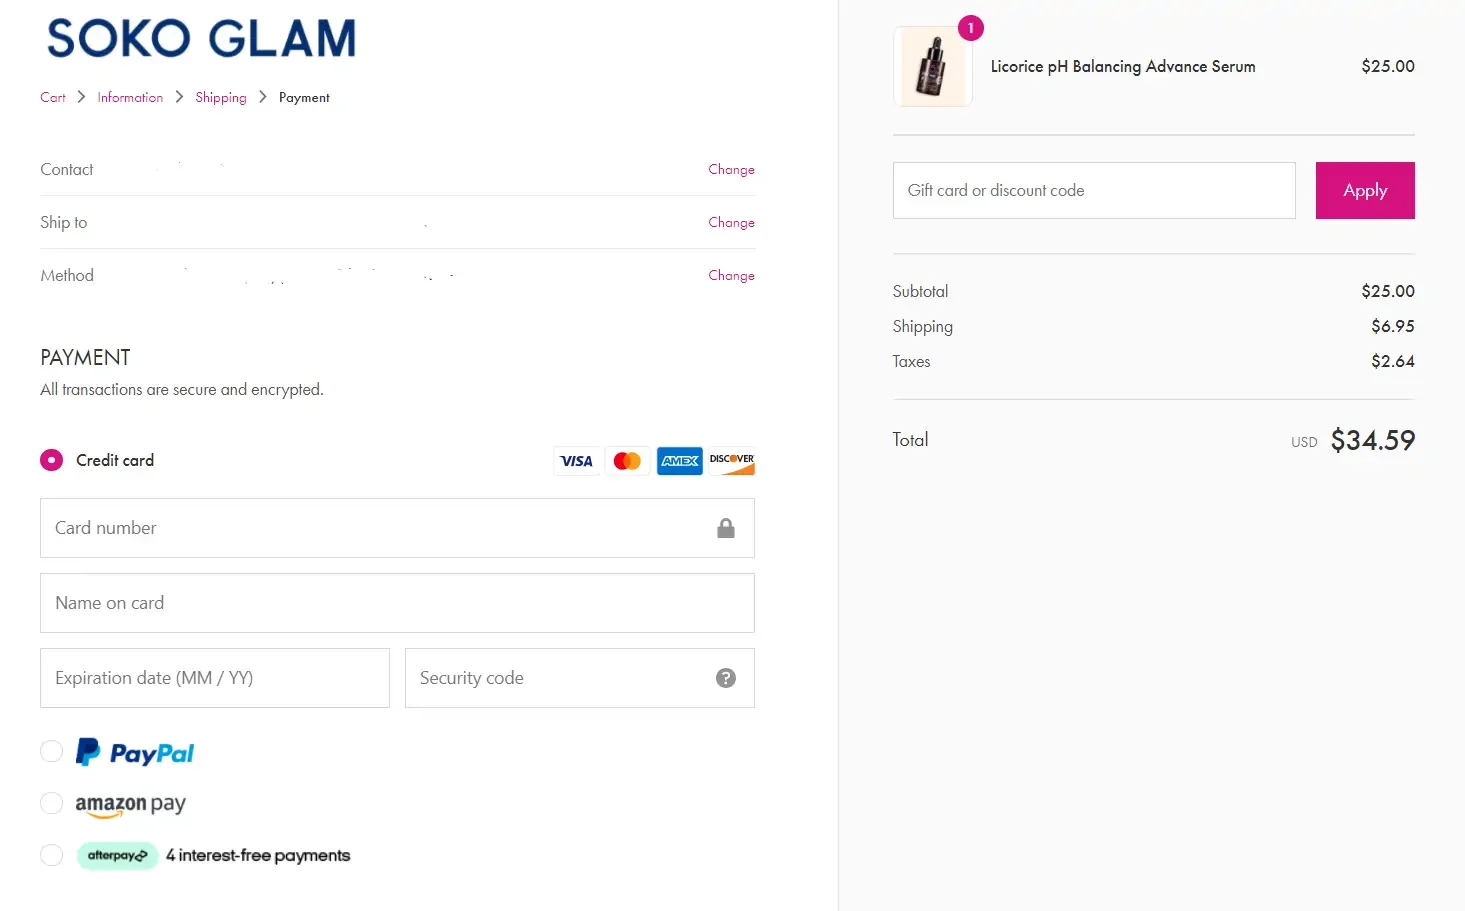 Soko Glam is an example of a checkout page that provides multiple payment options